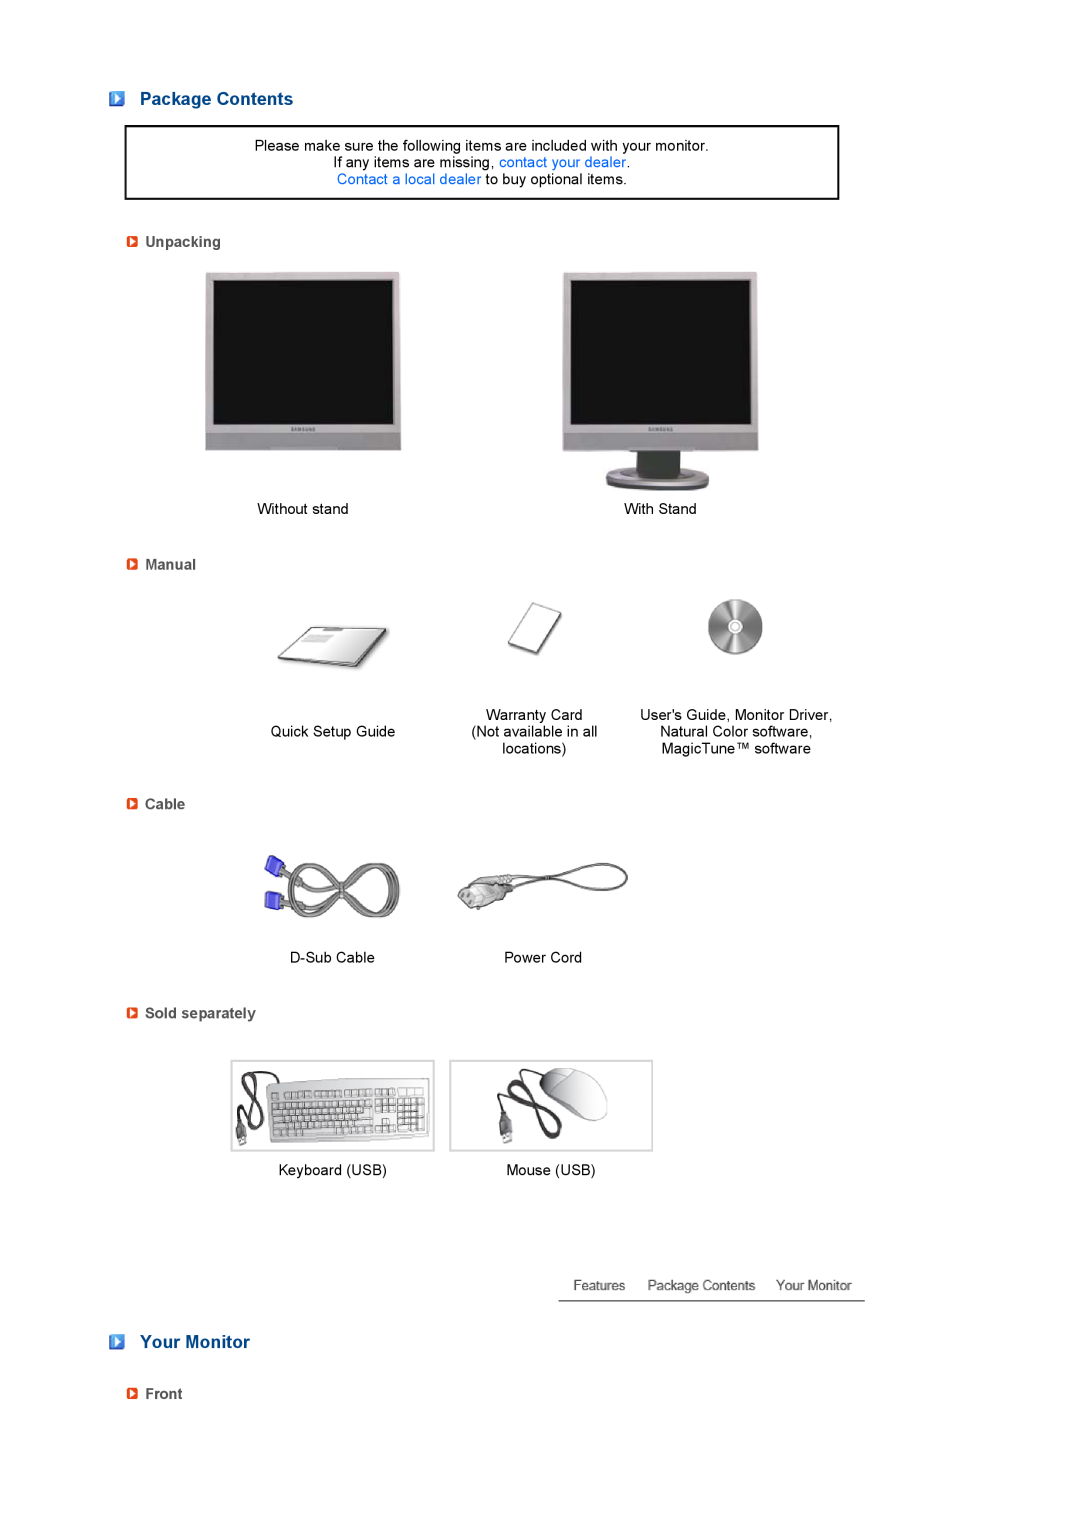 Samsung 920XT manual Package Contents, Your Monitor, Contact a local dealer to buy optional items, Unpacking, Manual, Cable 